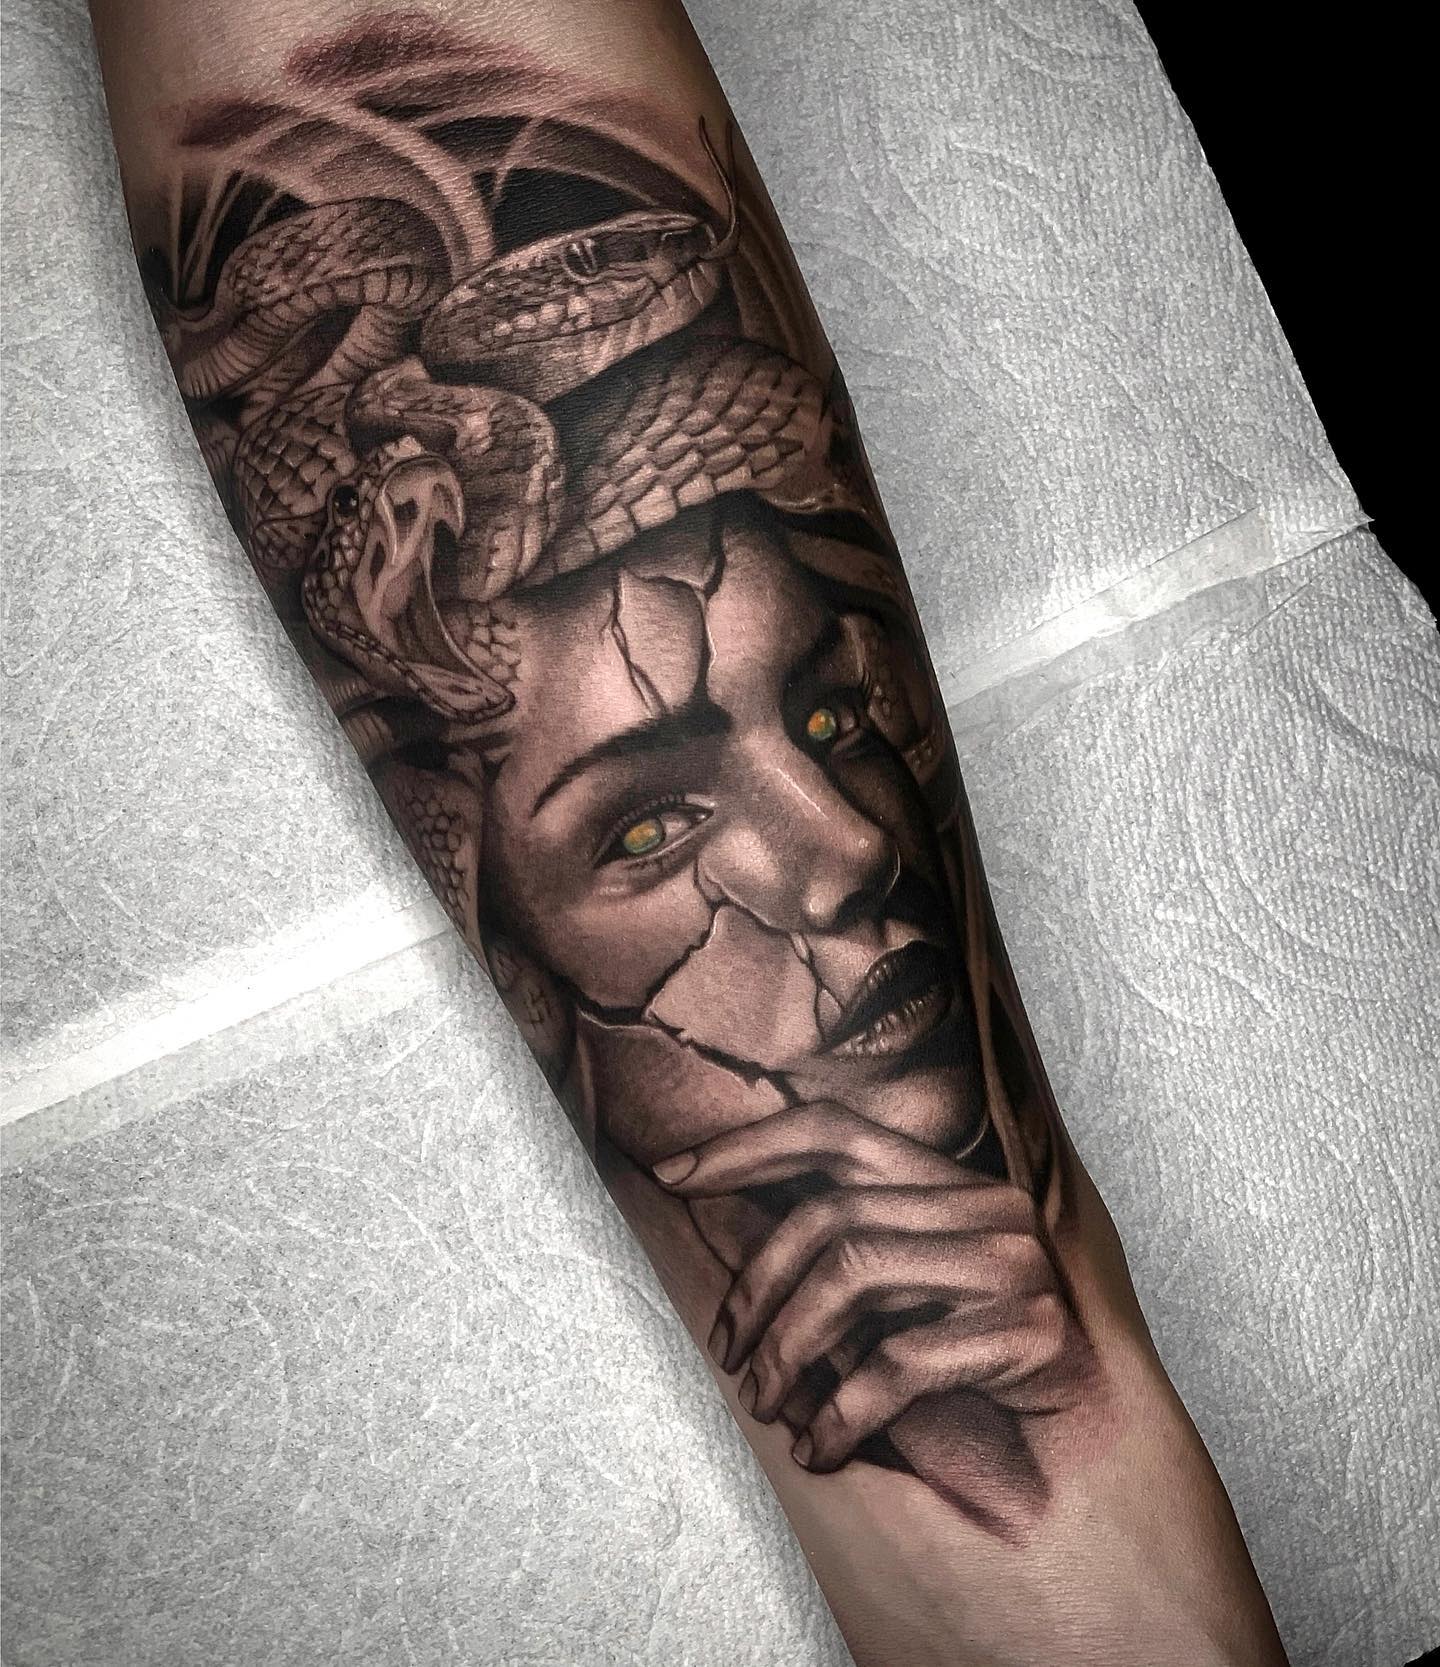 Medusa is looking for revenge this time. As you see above, Medusa's face is cracked but she is still alive. This may mean that nothing can stop her from being strong and brave. With this powerful meaning, let's get this arm tattoo to cover your arm.